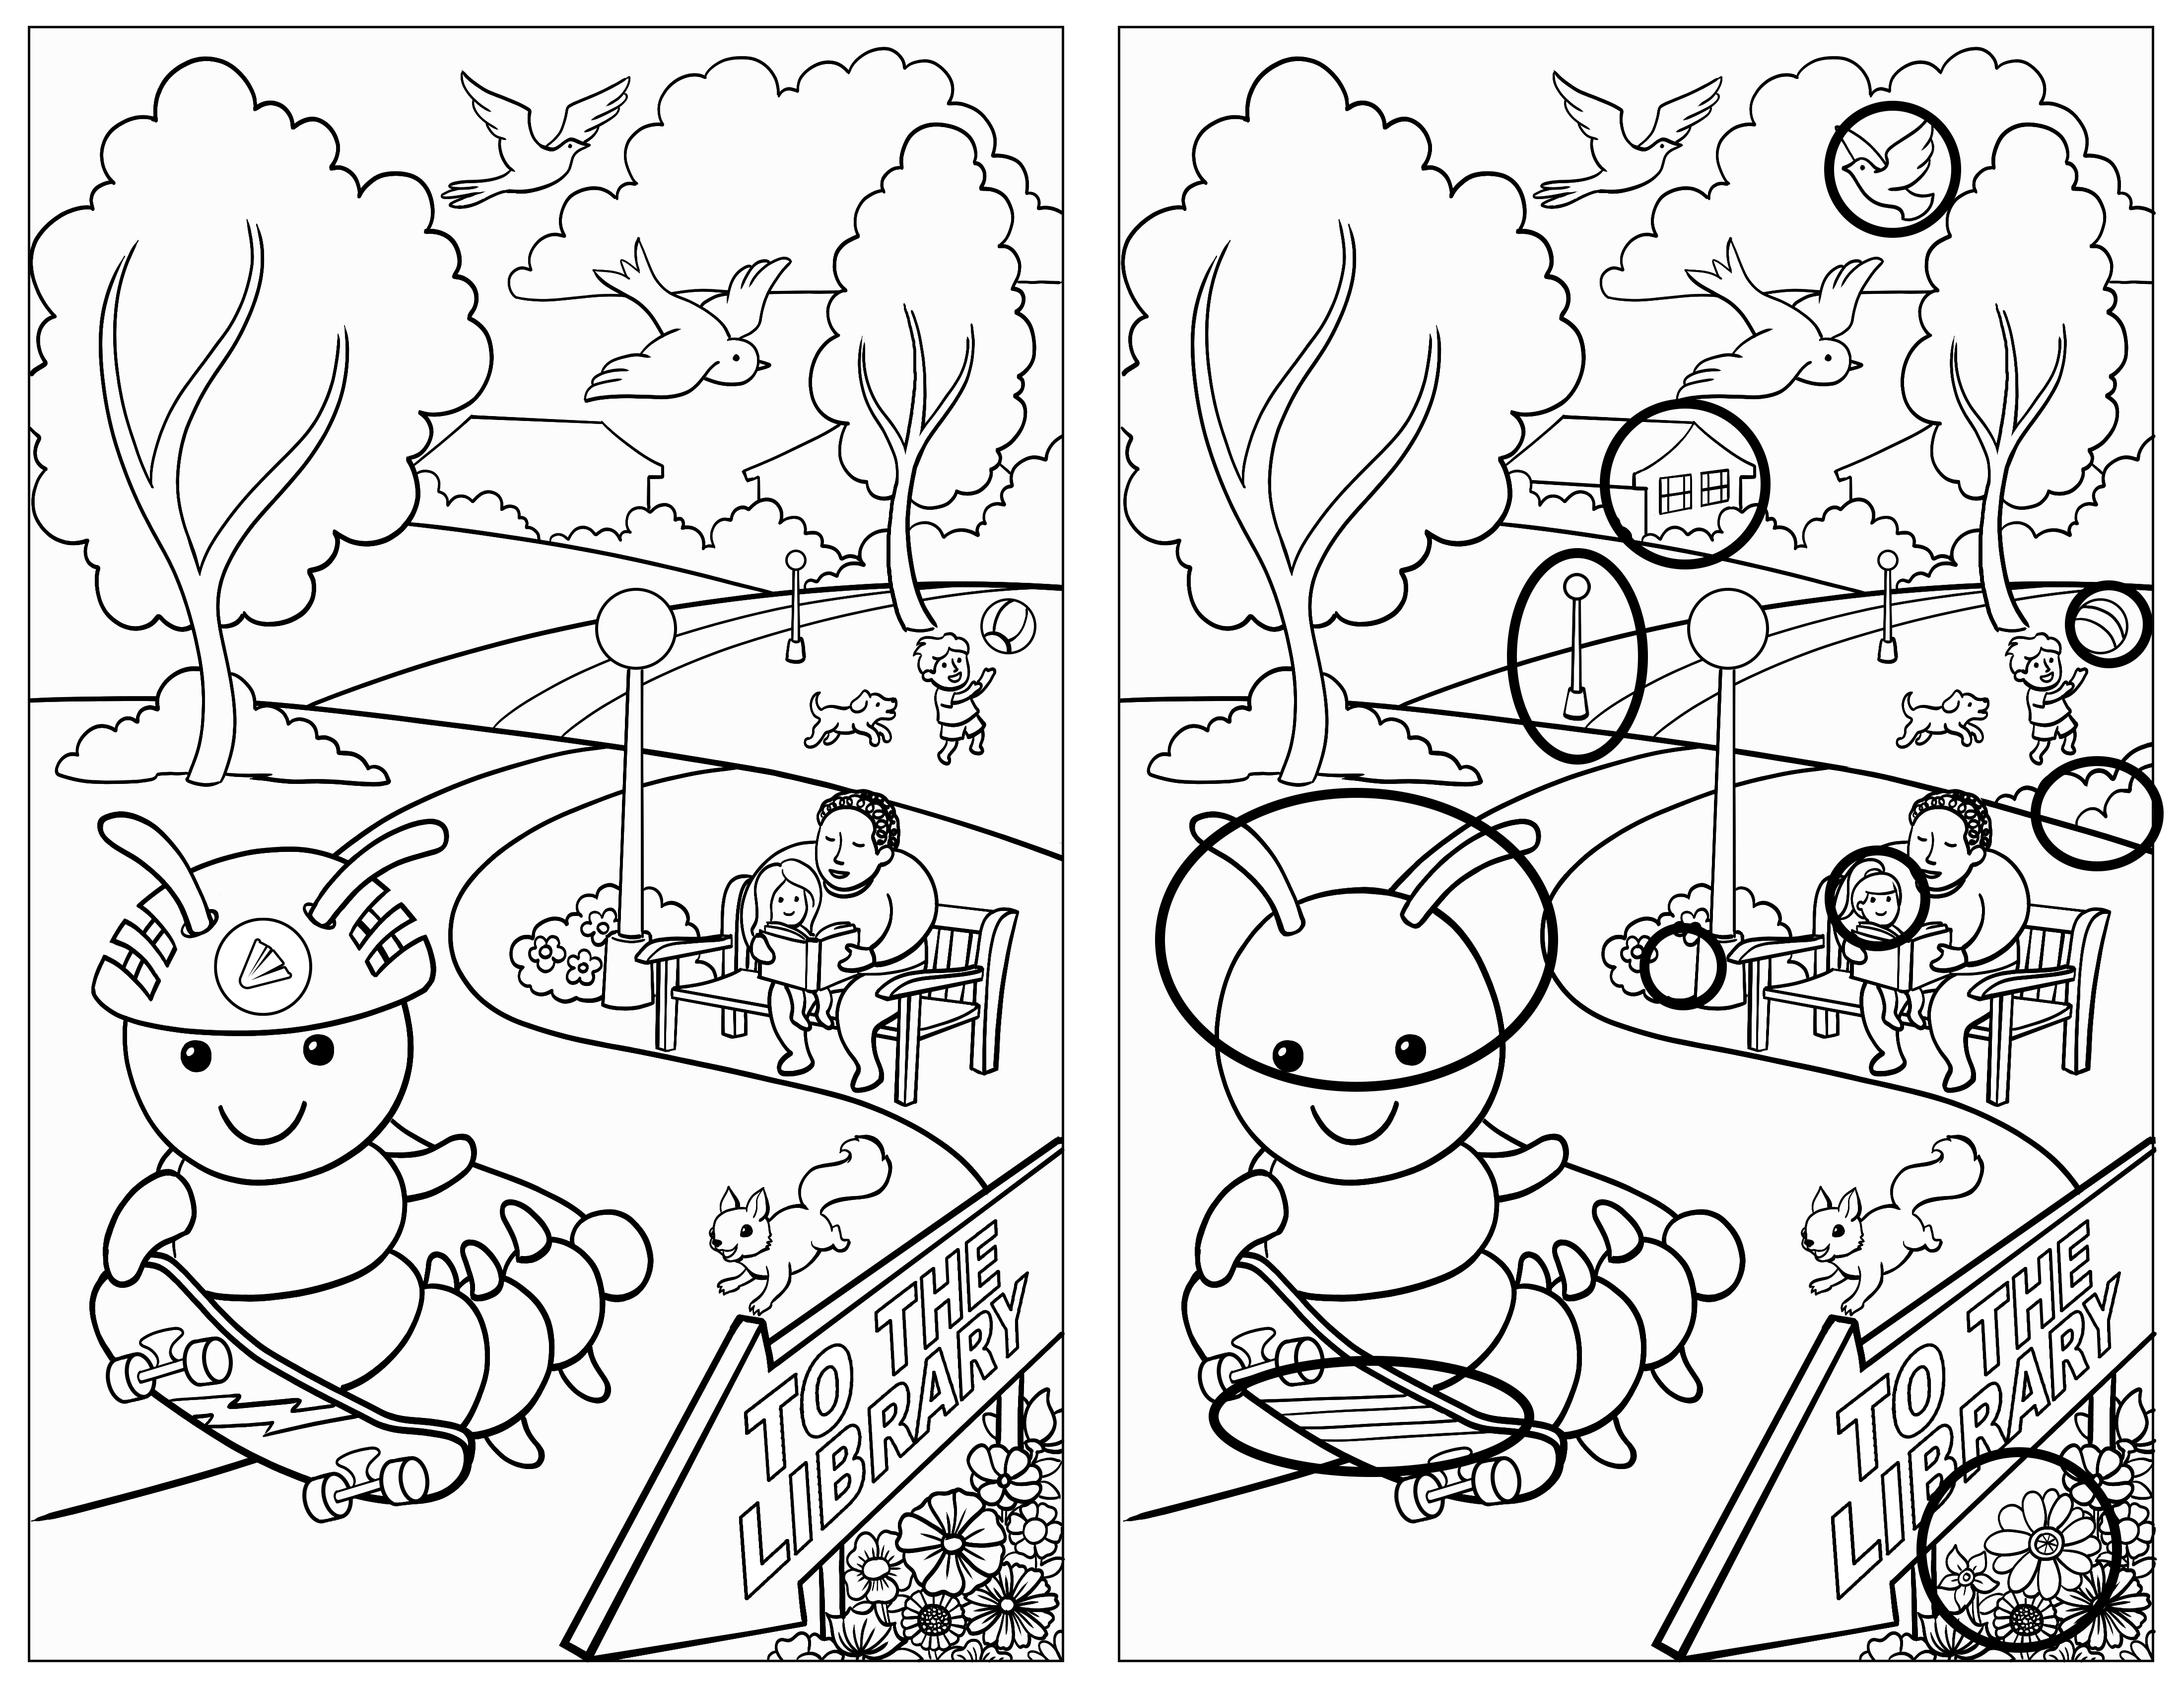 graphic of "find the differences" puzzle with differences marked with circles on the left side